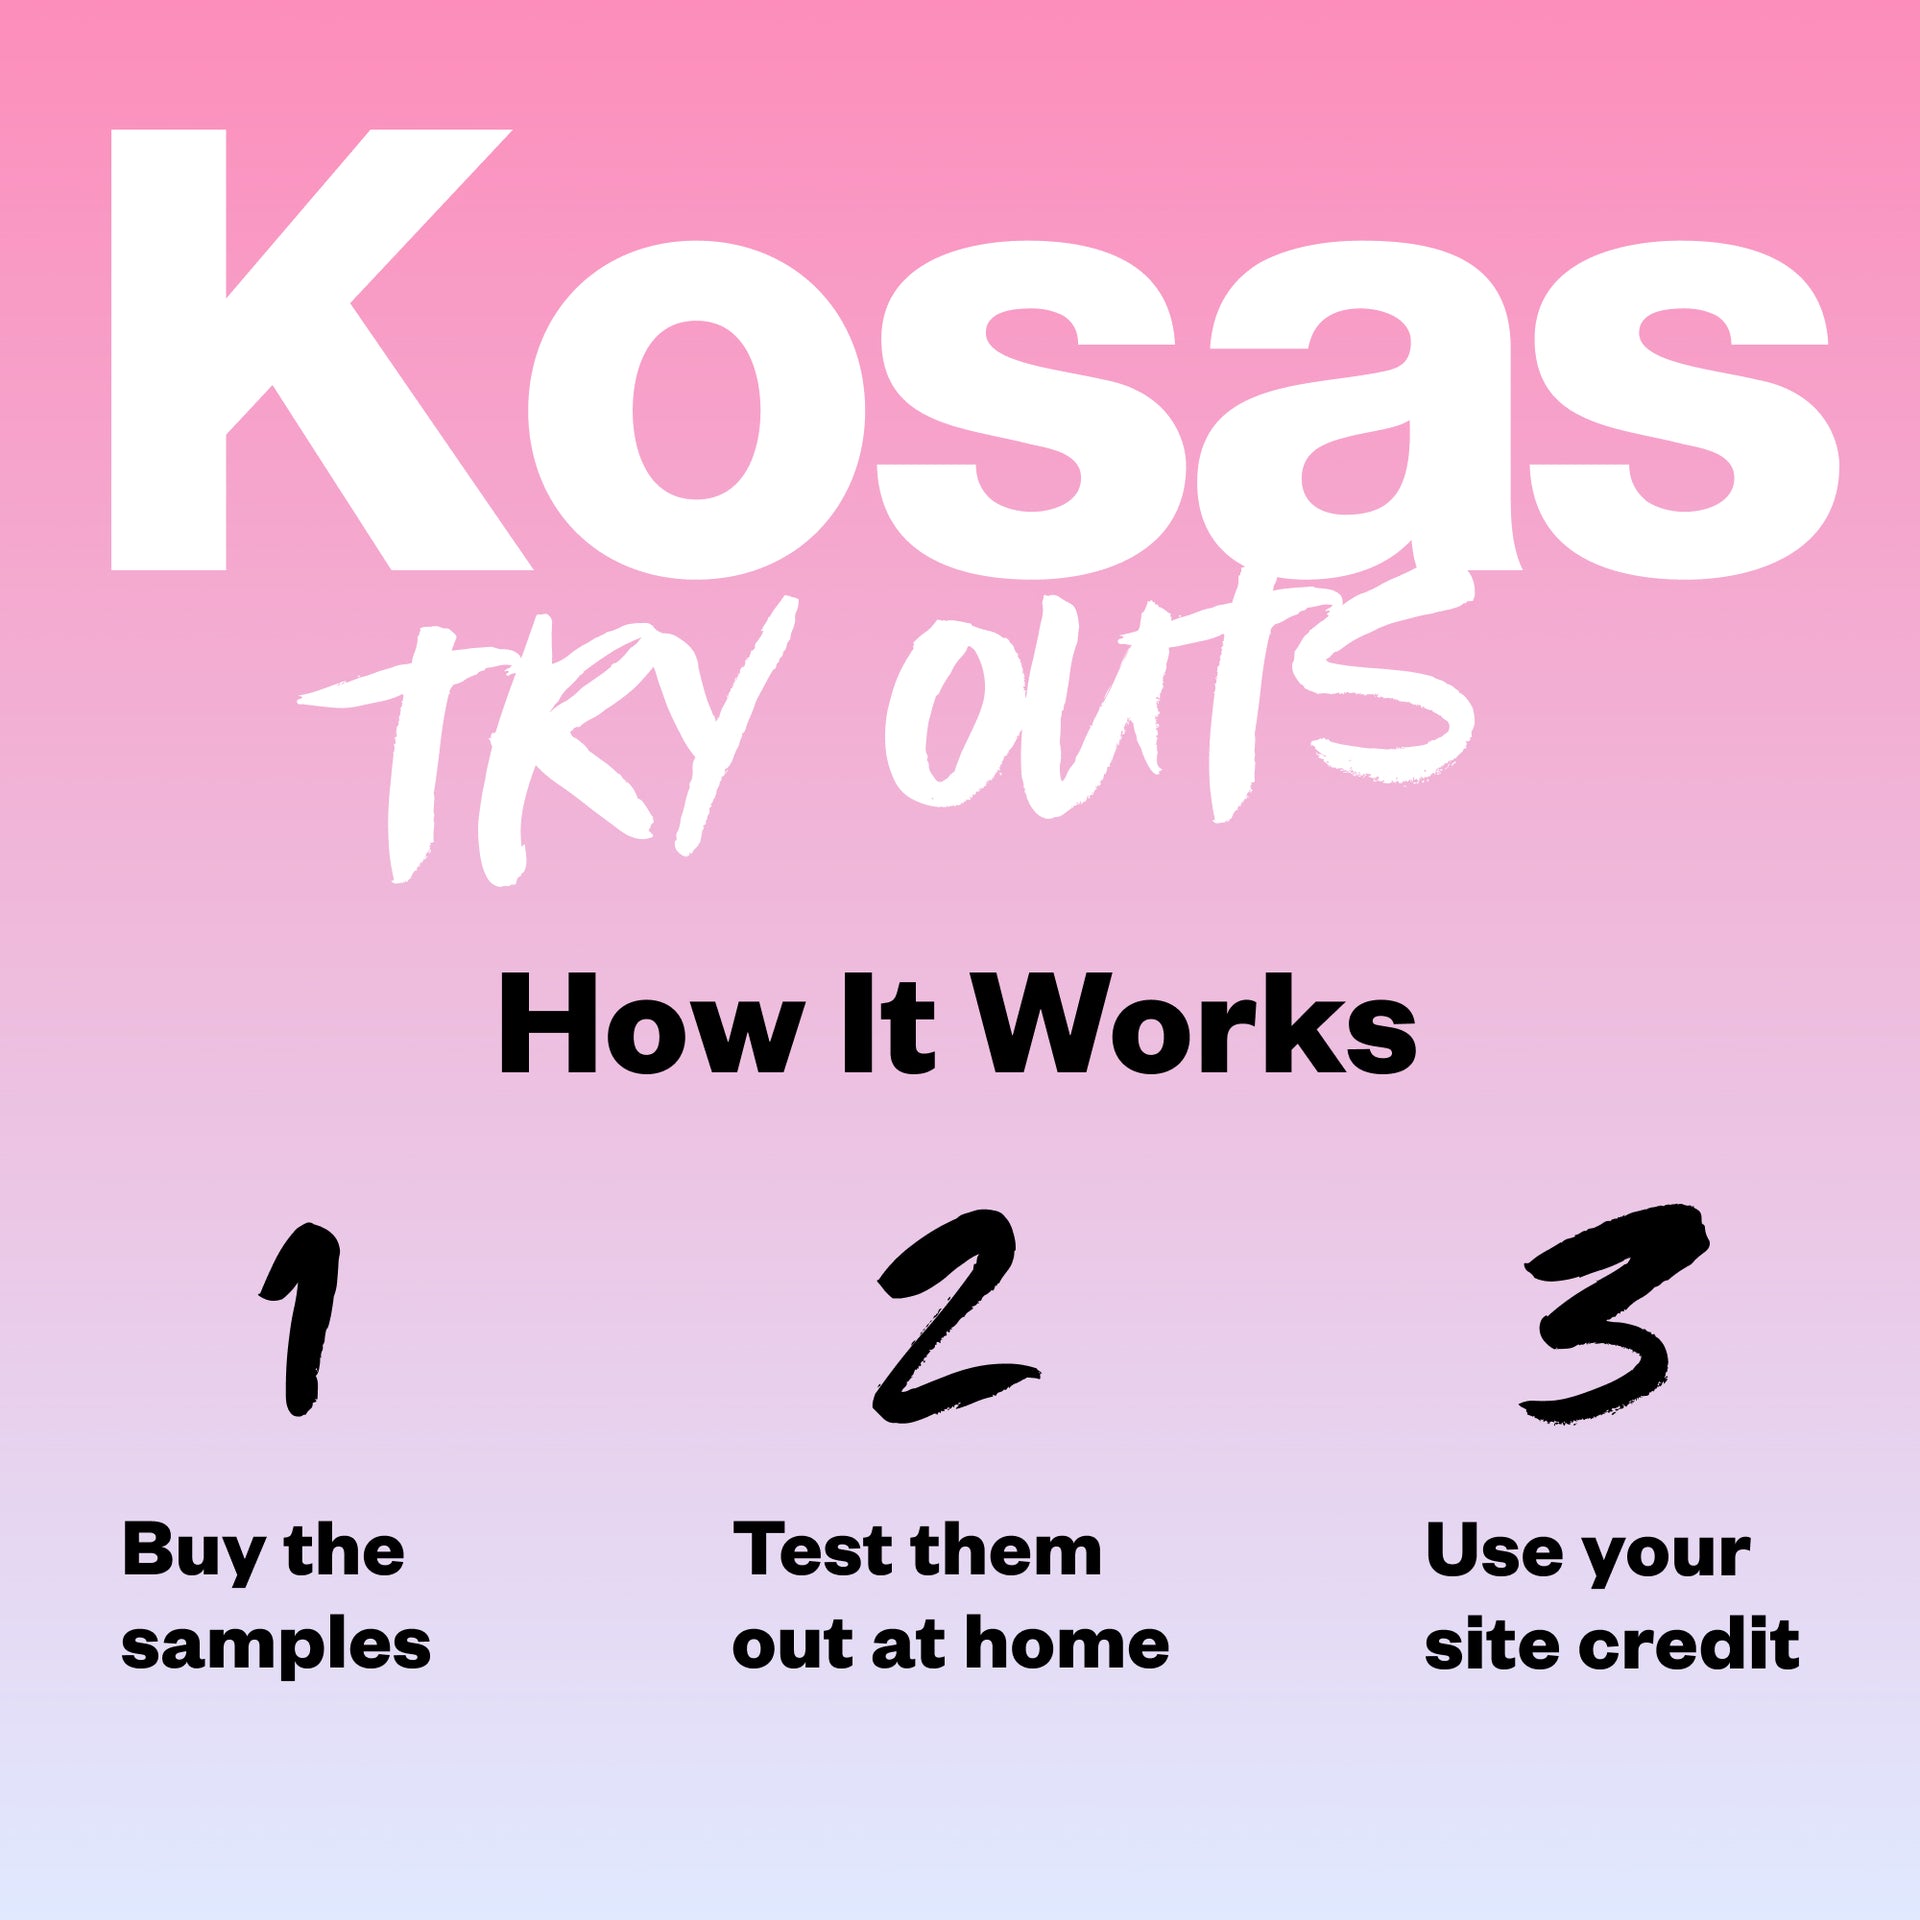 Kosas Try Outs